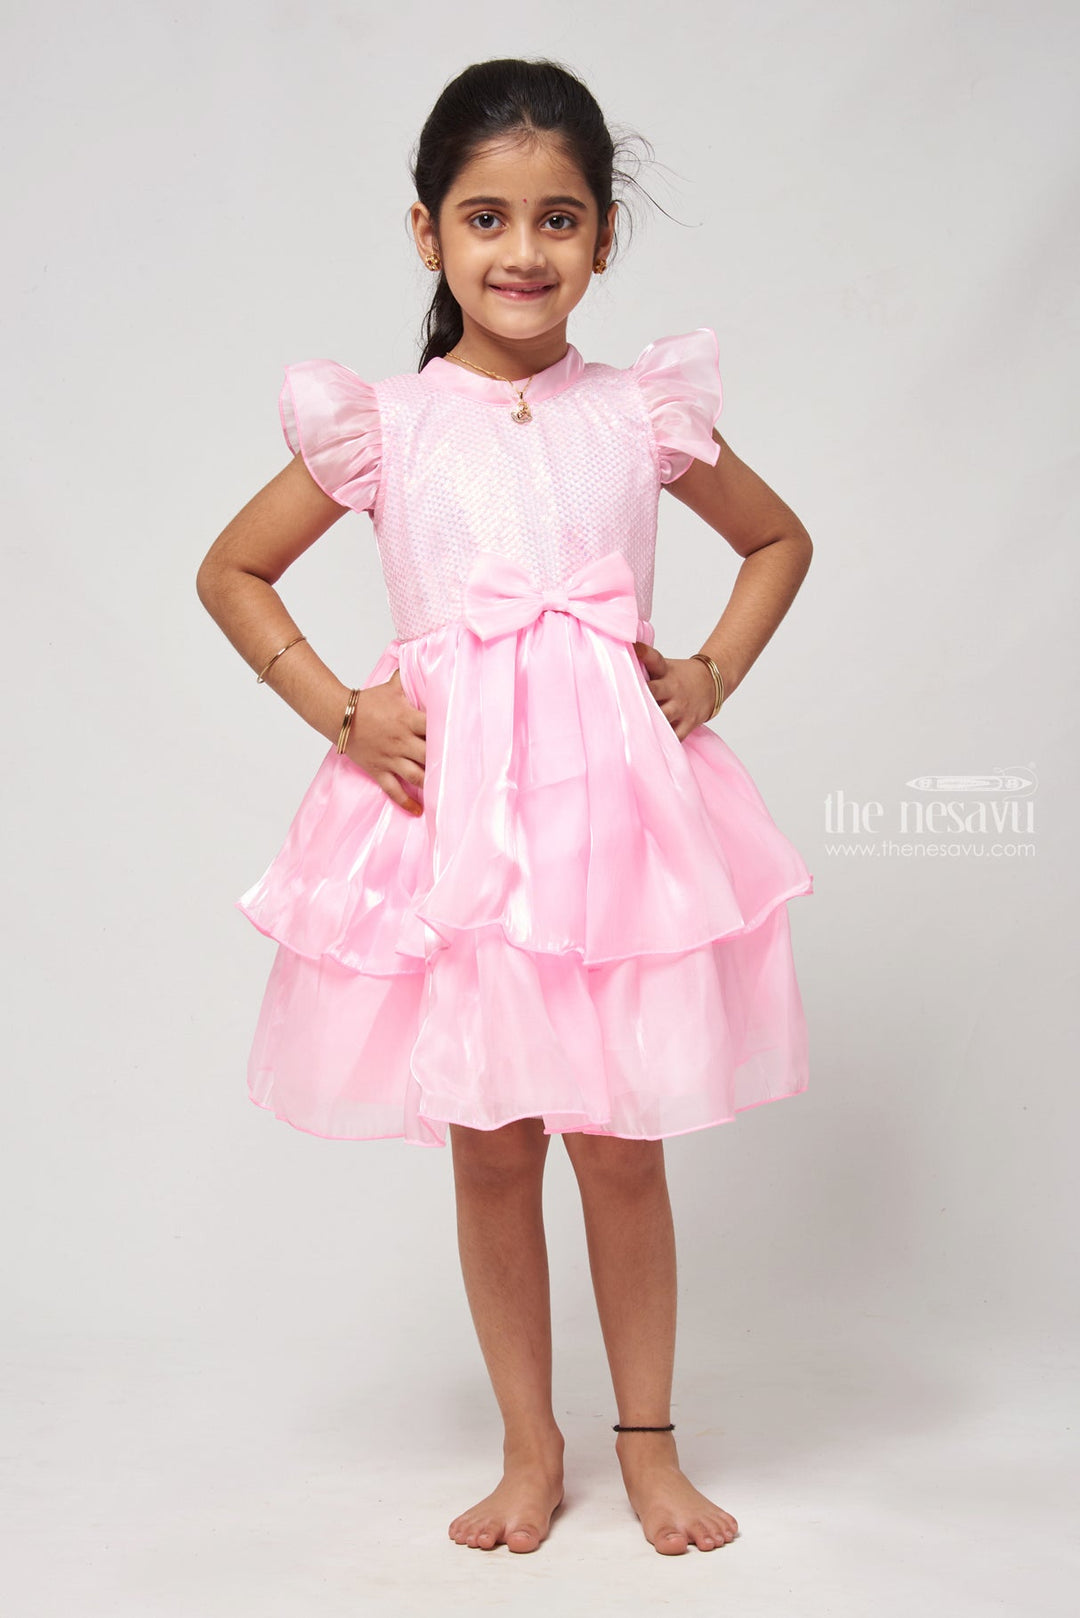 The Nesavu Girls Fancy Party Frock Baby Pink Elegance Sequin-Detailed Gown for Infants - Monotone Party Frock with Bow & Dual Layers Nesavu 16 (1Y) / Pink / Organza Tissue PF129B-16 Newborn Birthday Outfit | Party Wear Frock For Girls | The Nesavu